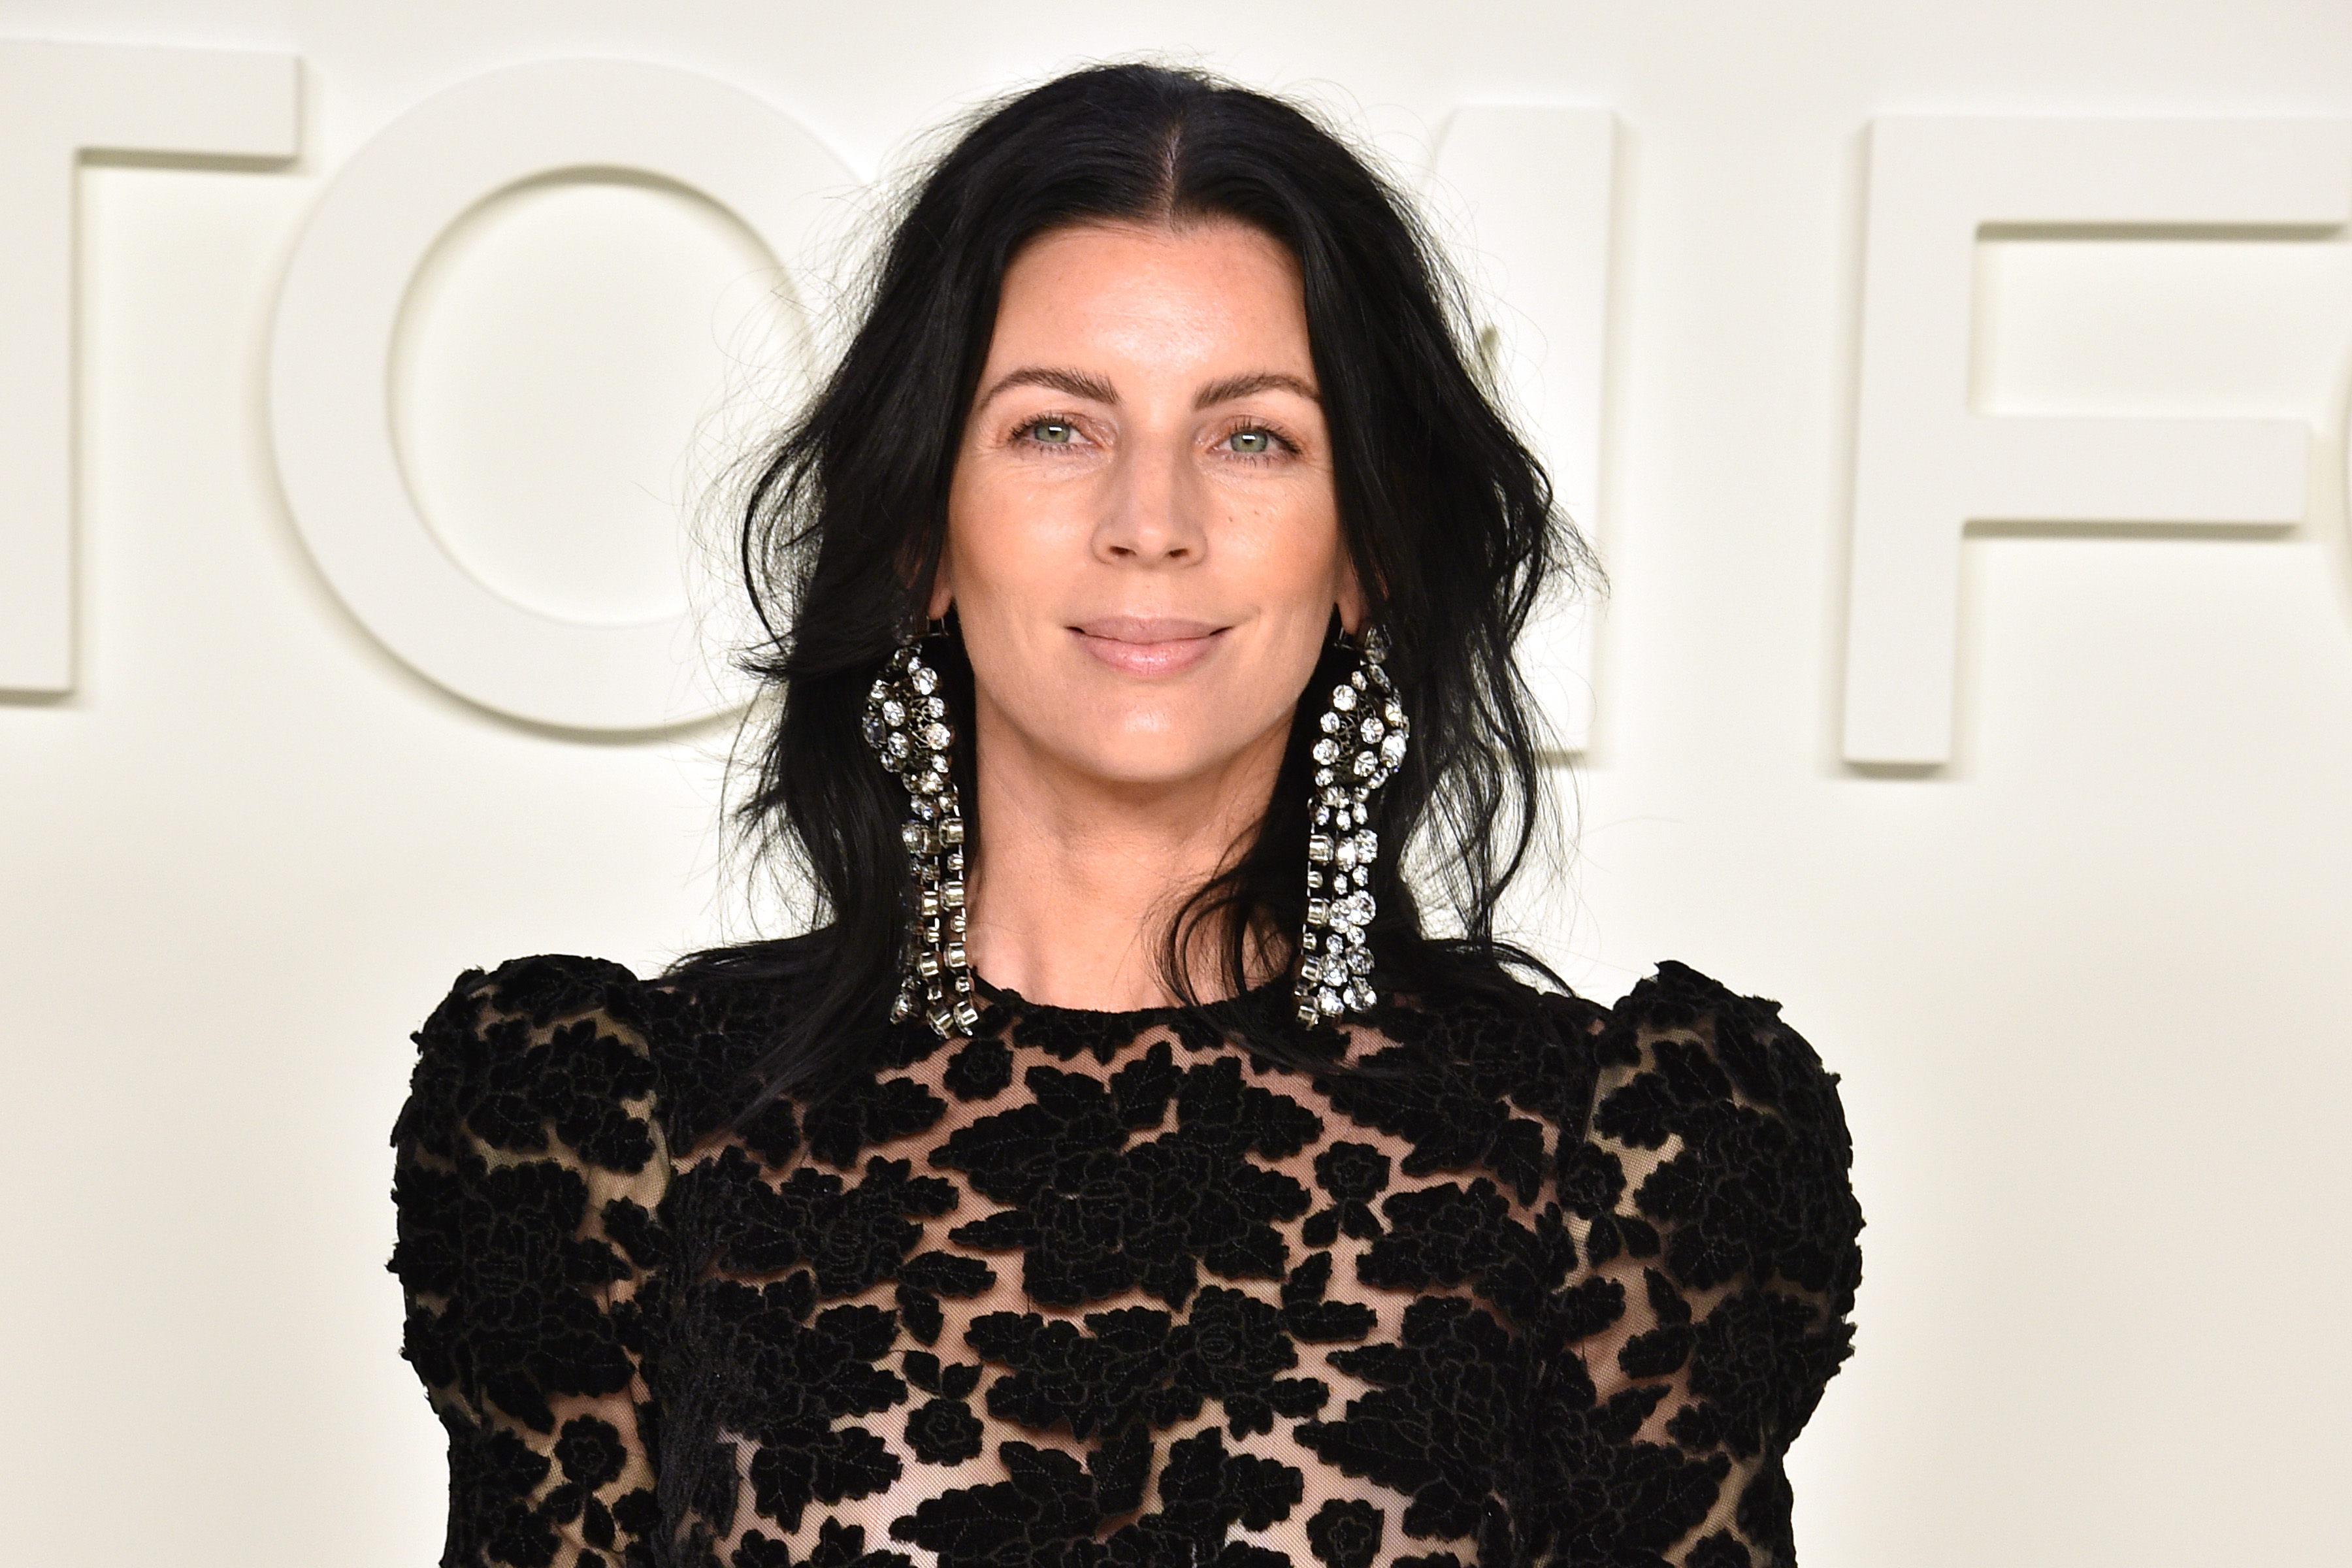 Liberty Ross poses against a white background in Los Angeles, California